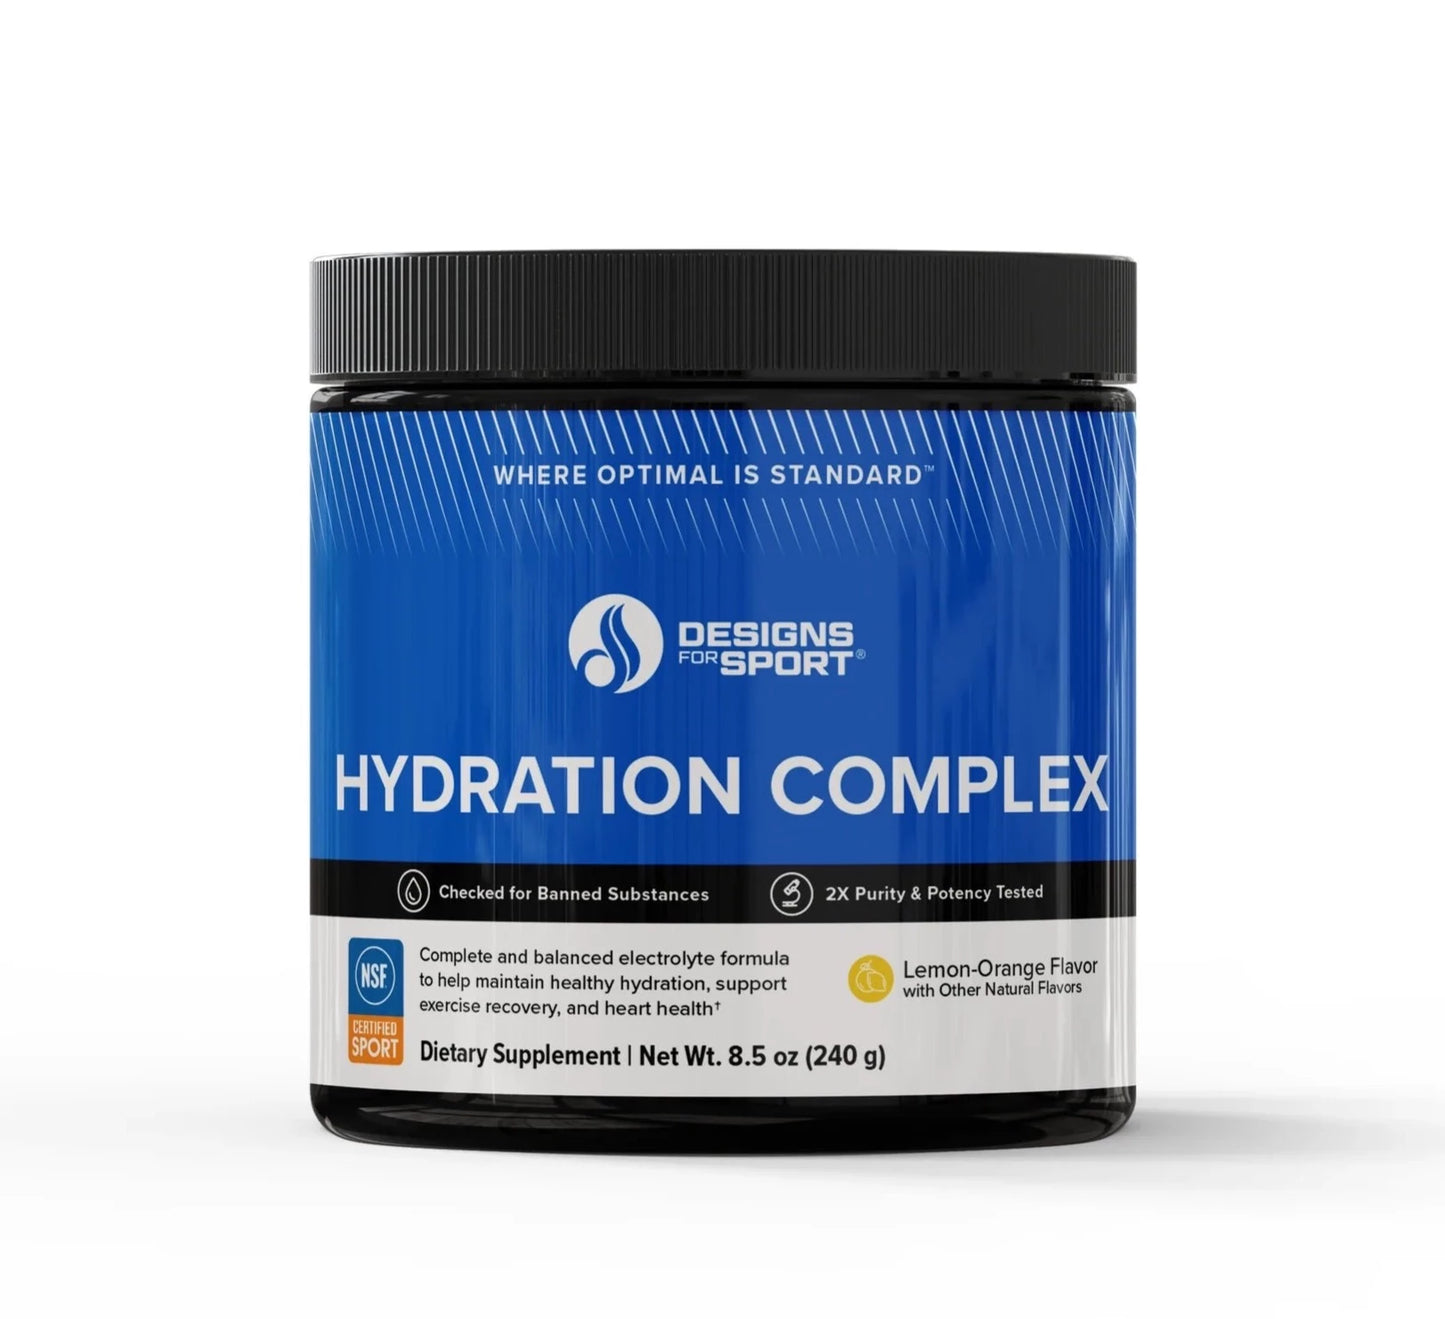 Hydration Complex Designs for Sport (DFS)